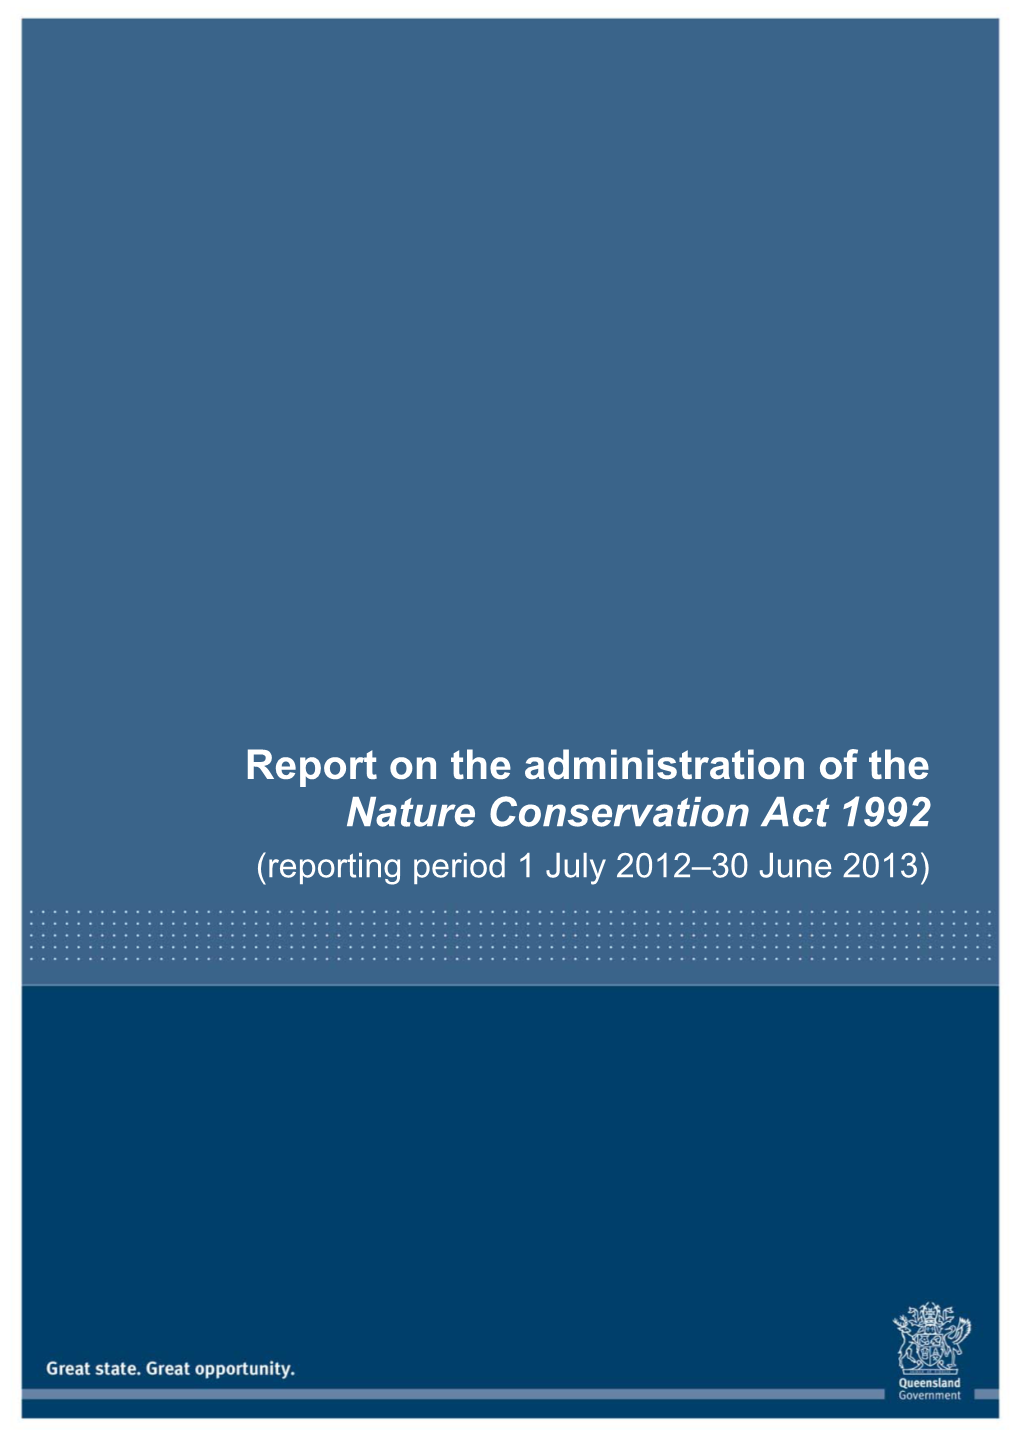 Report on the Administration of the Nature Conservation Act 1992 (1 July 2012–30 June 2013)